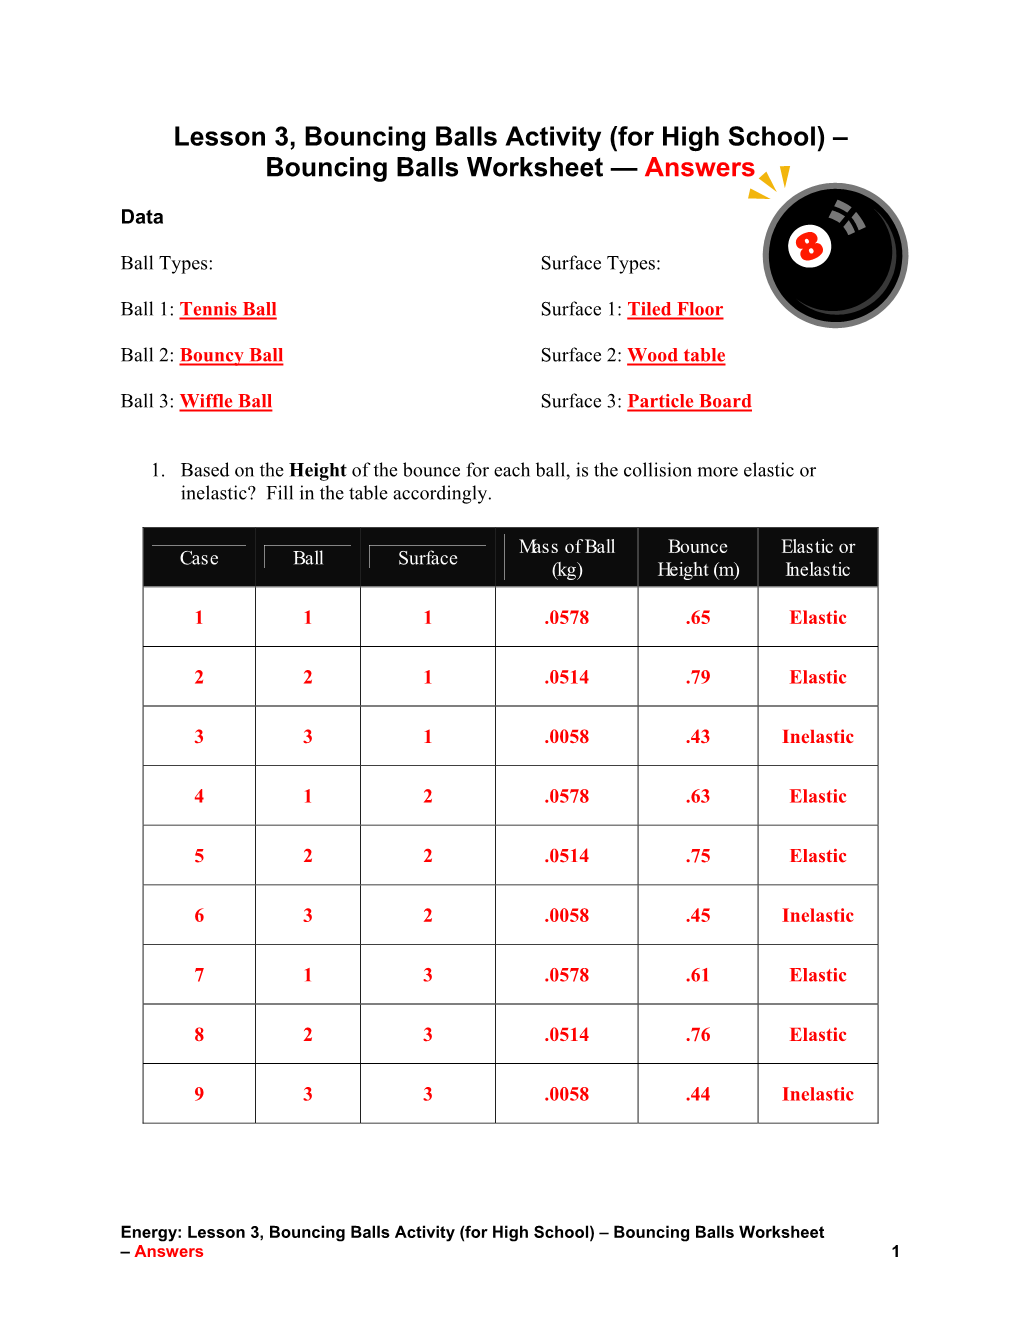 Lesson 3, Bouncing Balls Activity (For High School) – Bouncing Balls Worksheet — Answers